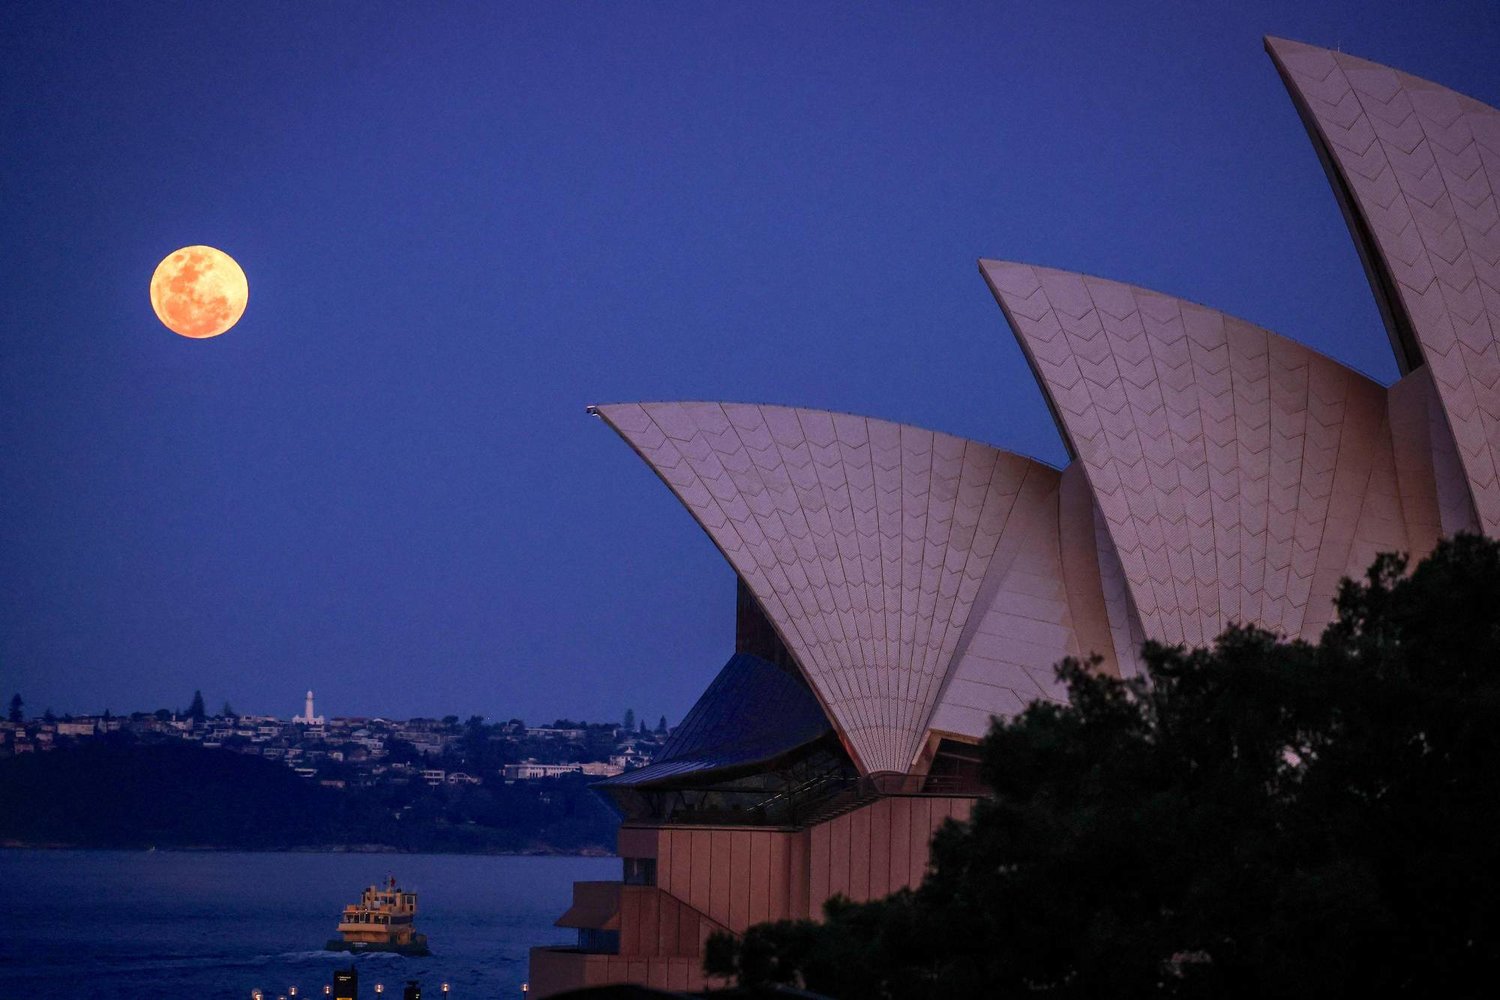 The full moon, a supermoon also known as the "Harvest Moon", rises above Macquarie Lighthouse and the Sydney Opera House in Sydney on September 29, 2023. (Photo by DAVID GRAY / AFP)